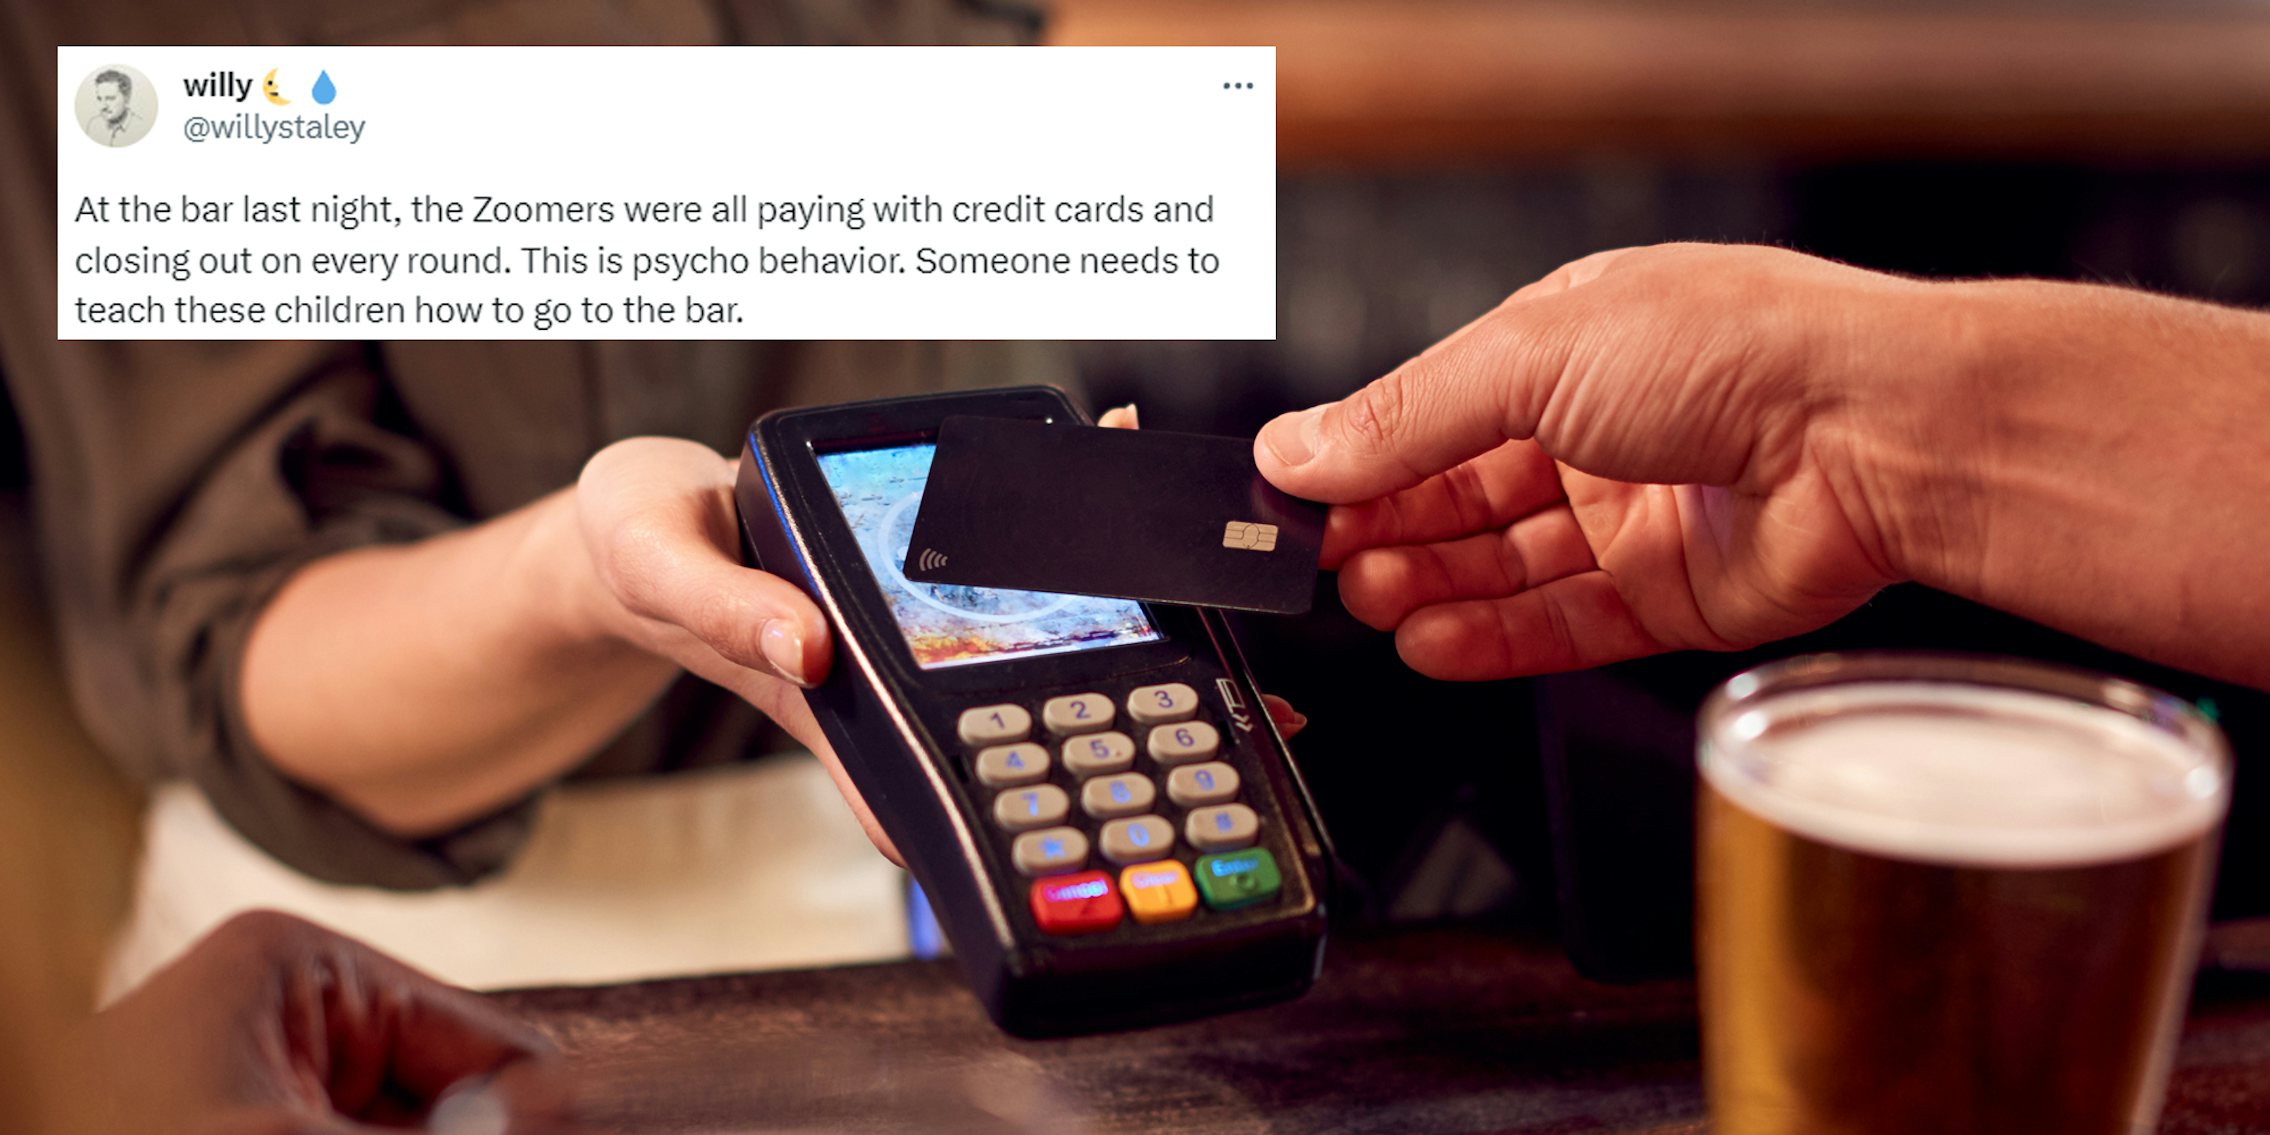 customer paying with card at bar with Tweet by willy in top left corner 'At the bar last night, the Zoomers were all paying with credit cards and closing out on every round. This is psycho behavior. Someone teach these children how to go to the bar.'